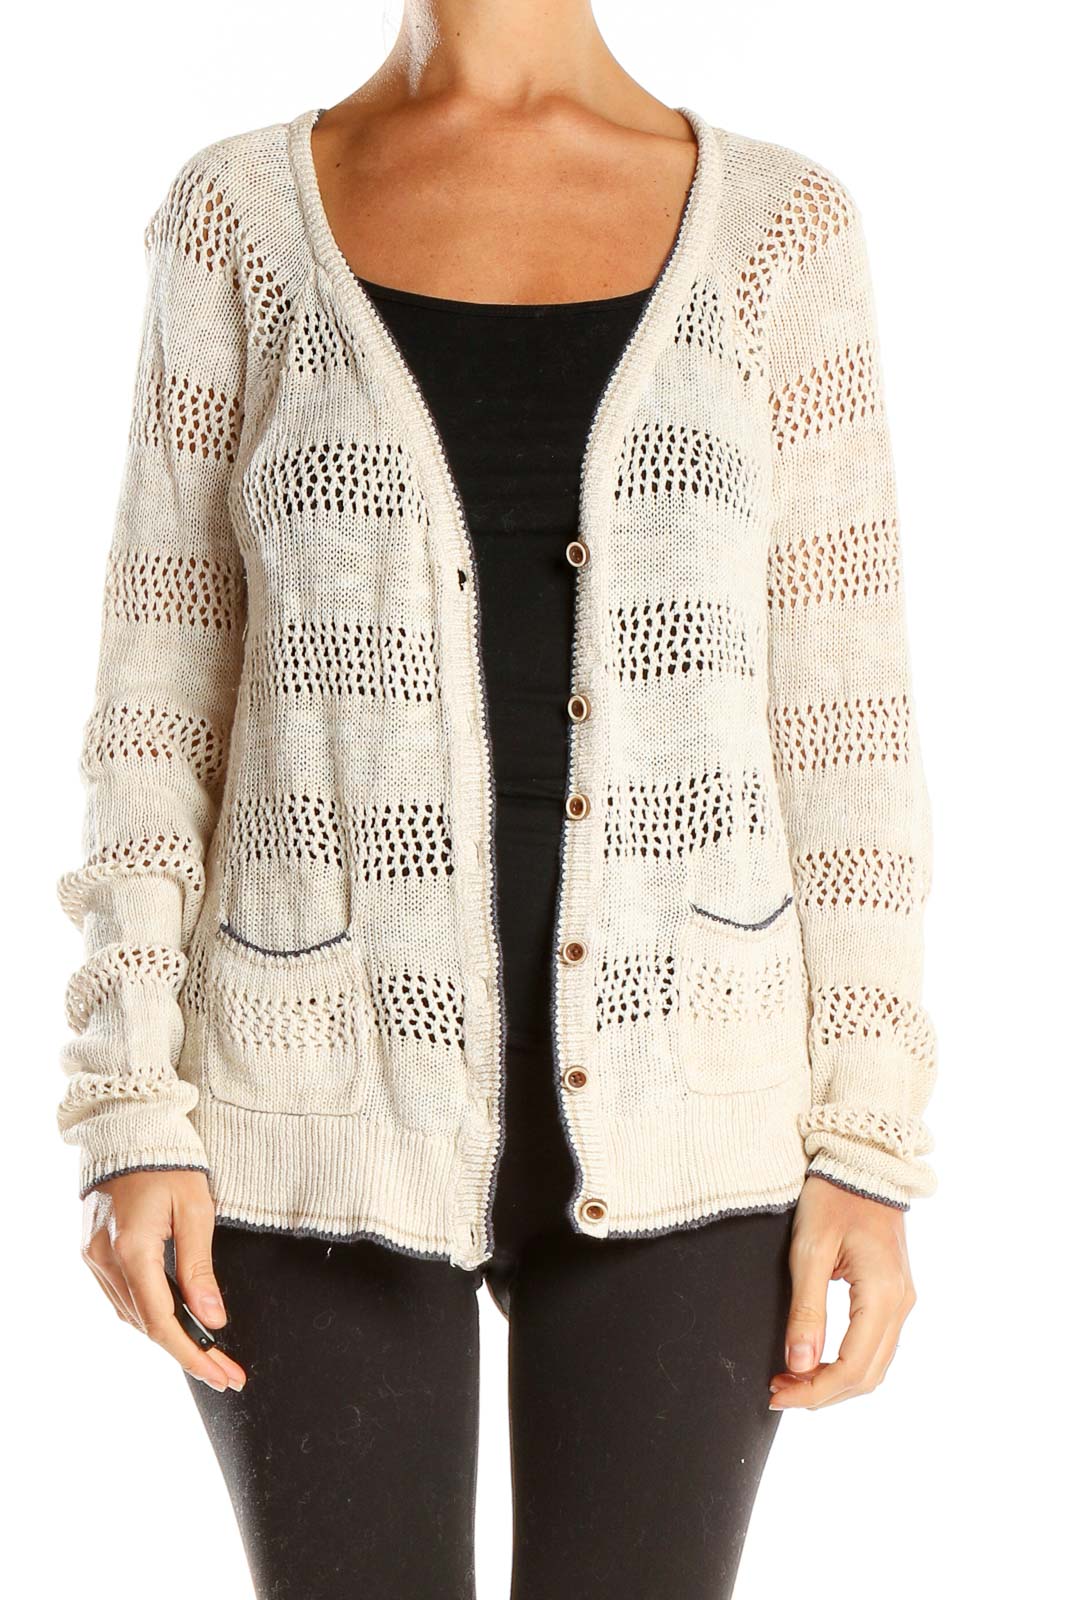 White Knit Cardigan Front